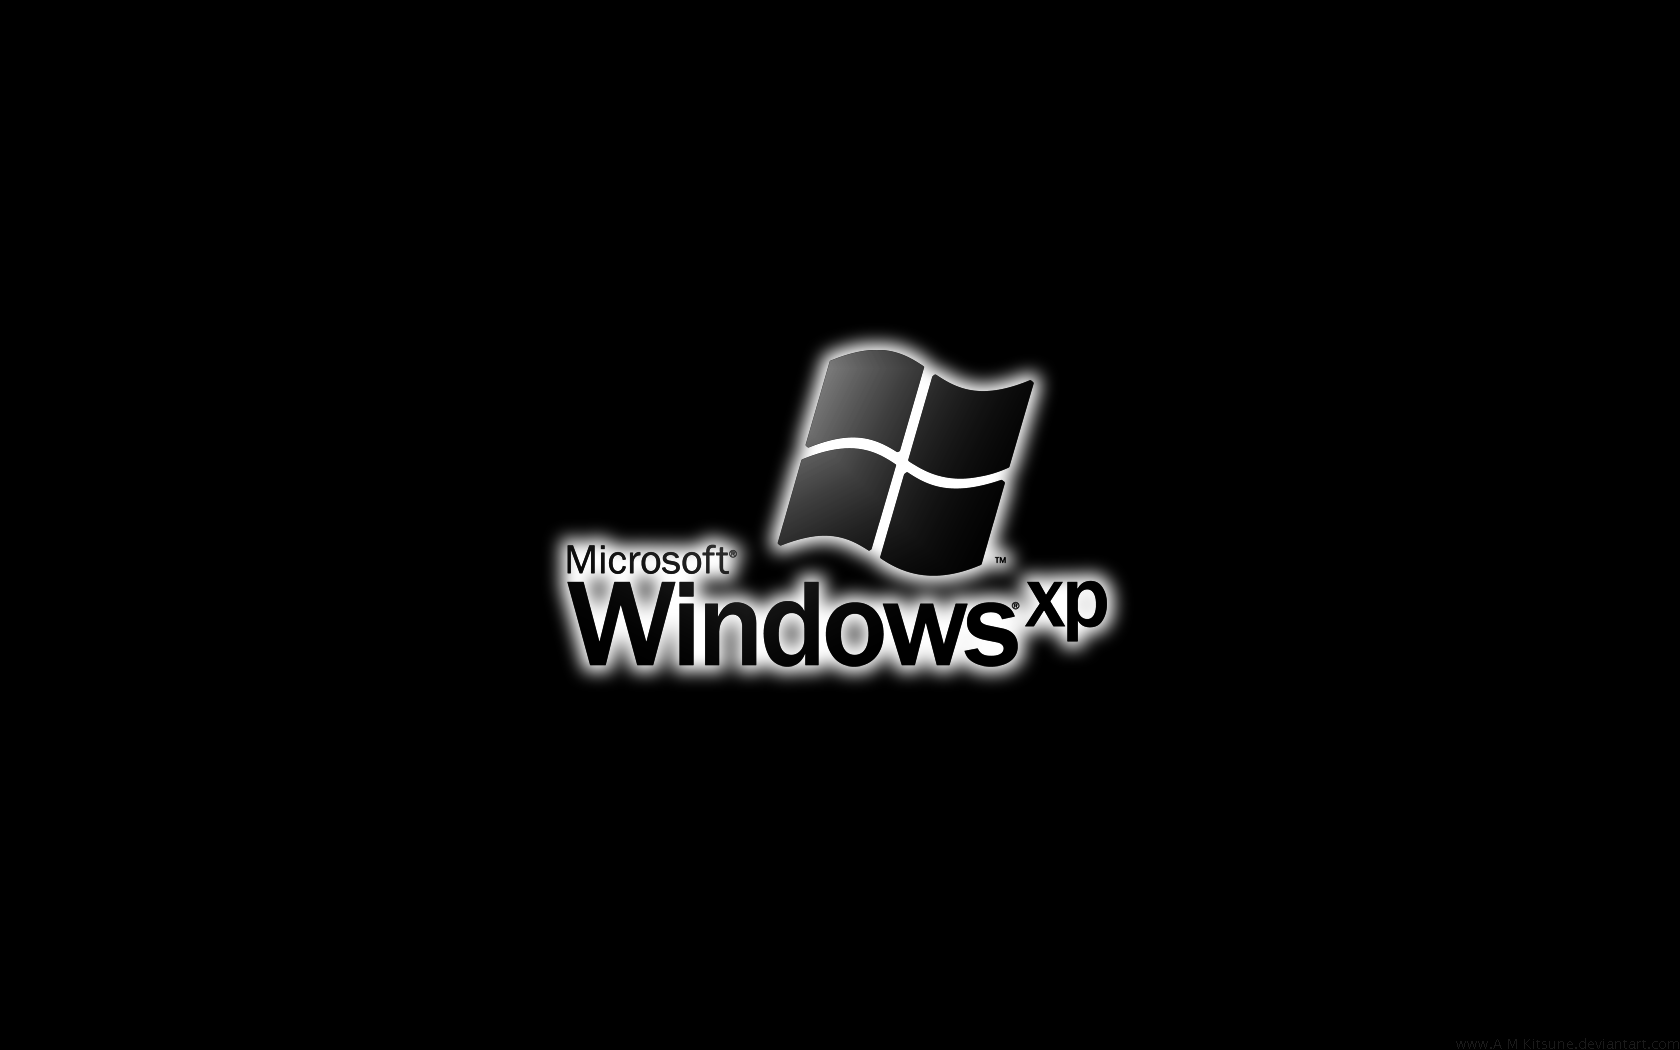 Free Windows Xp Wallpapers - Wallpaper Cave